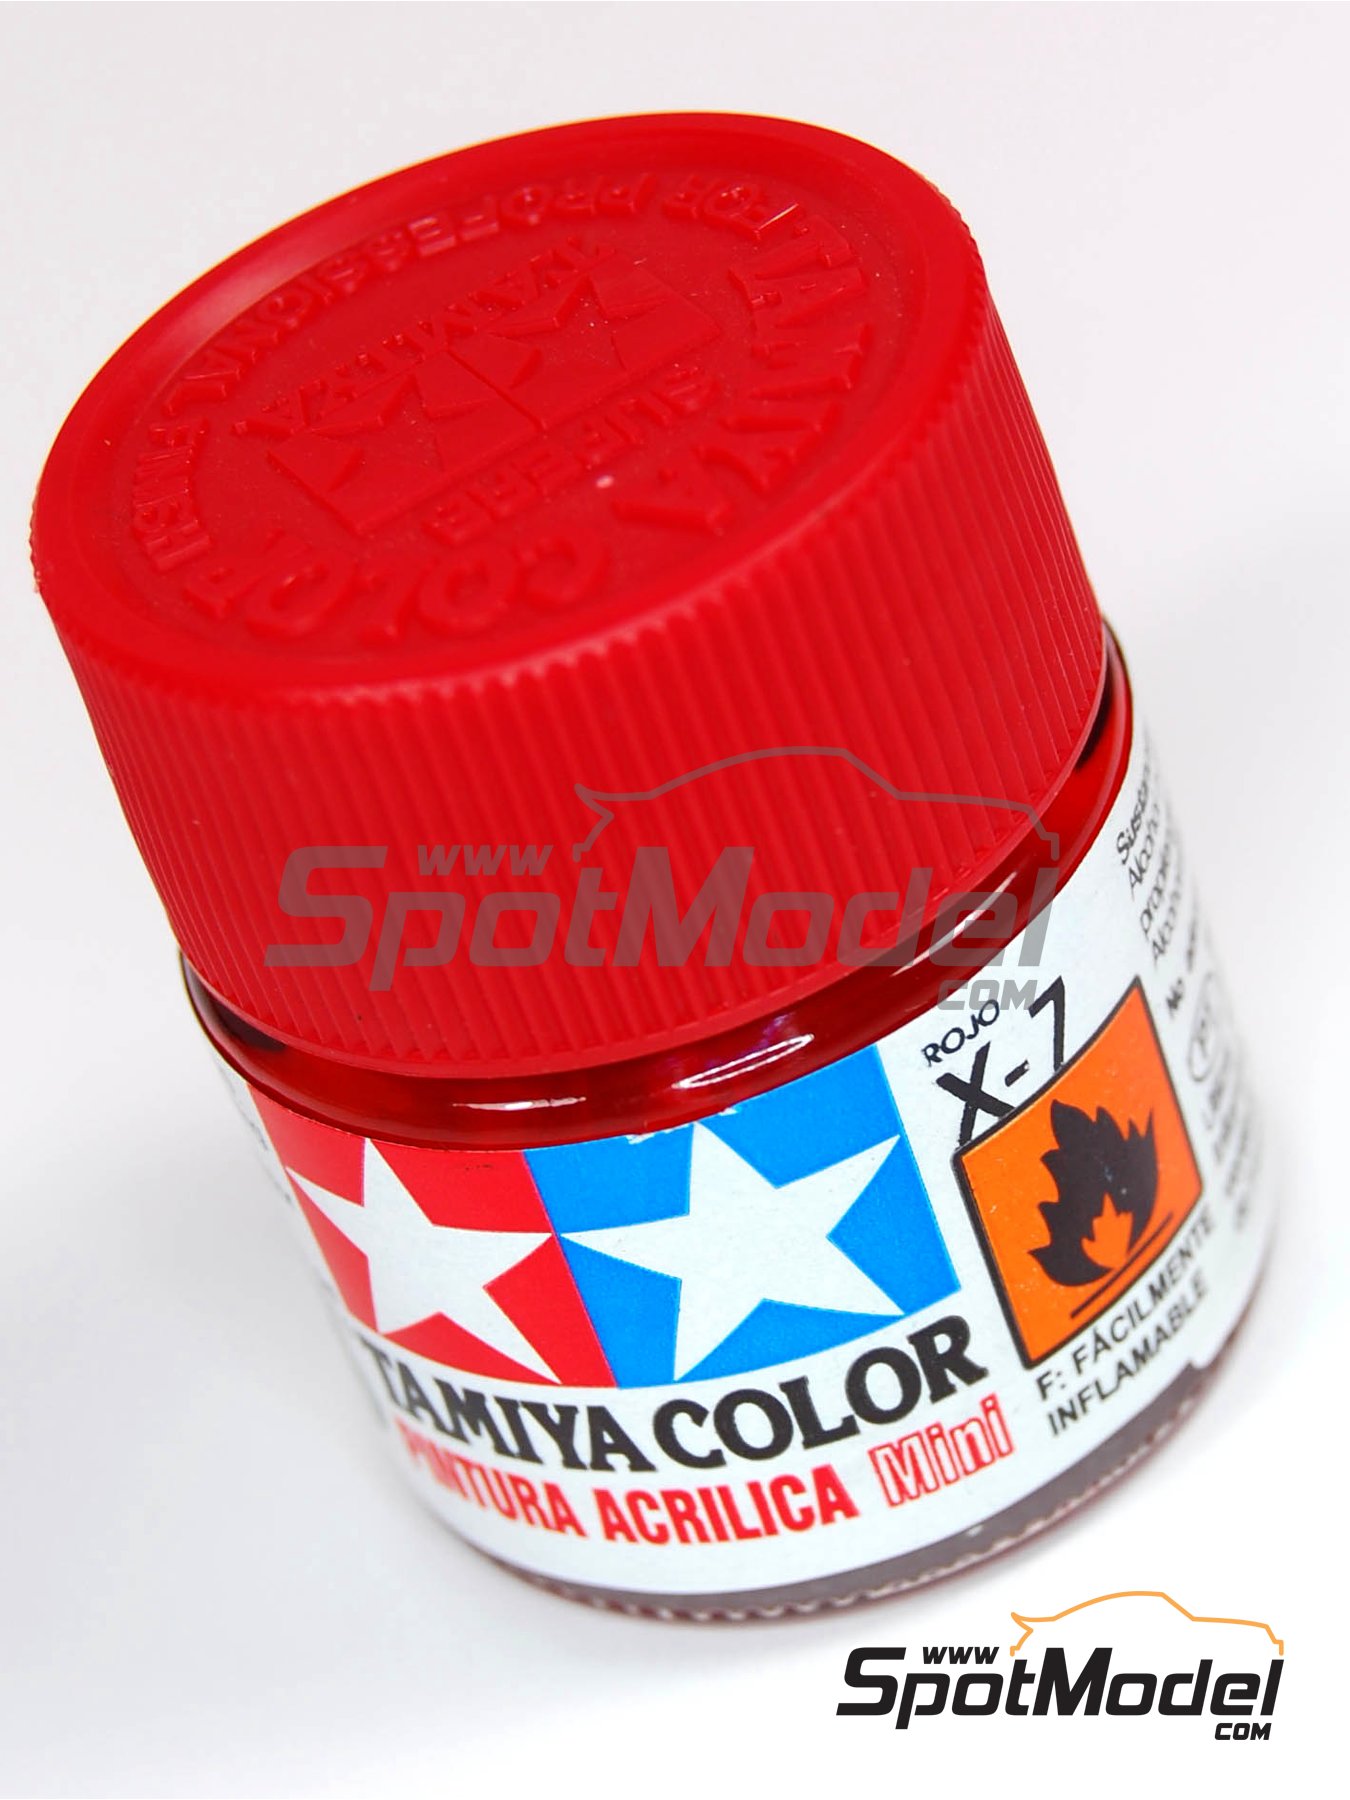 Retarder for Tamiya paints? - Modelling Discussion - Large Scale